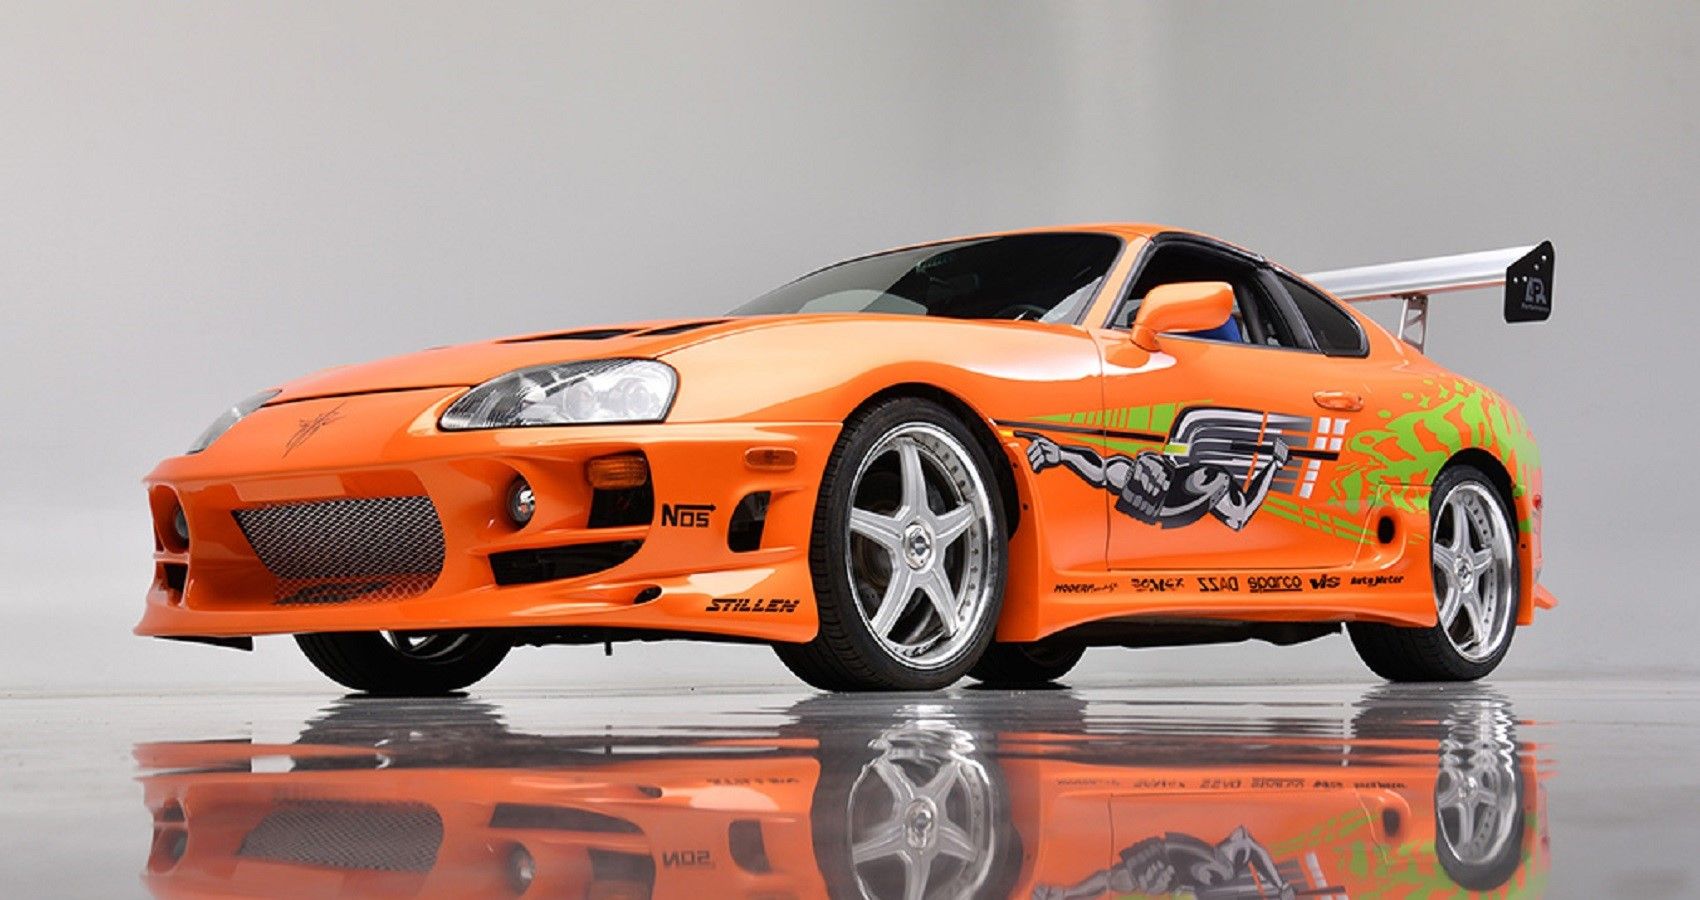 The Fast And The Furious Toyota Supra, front